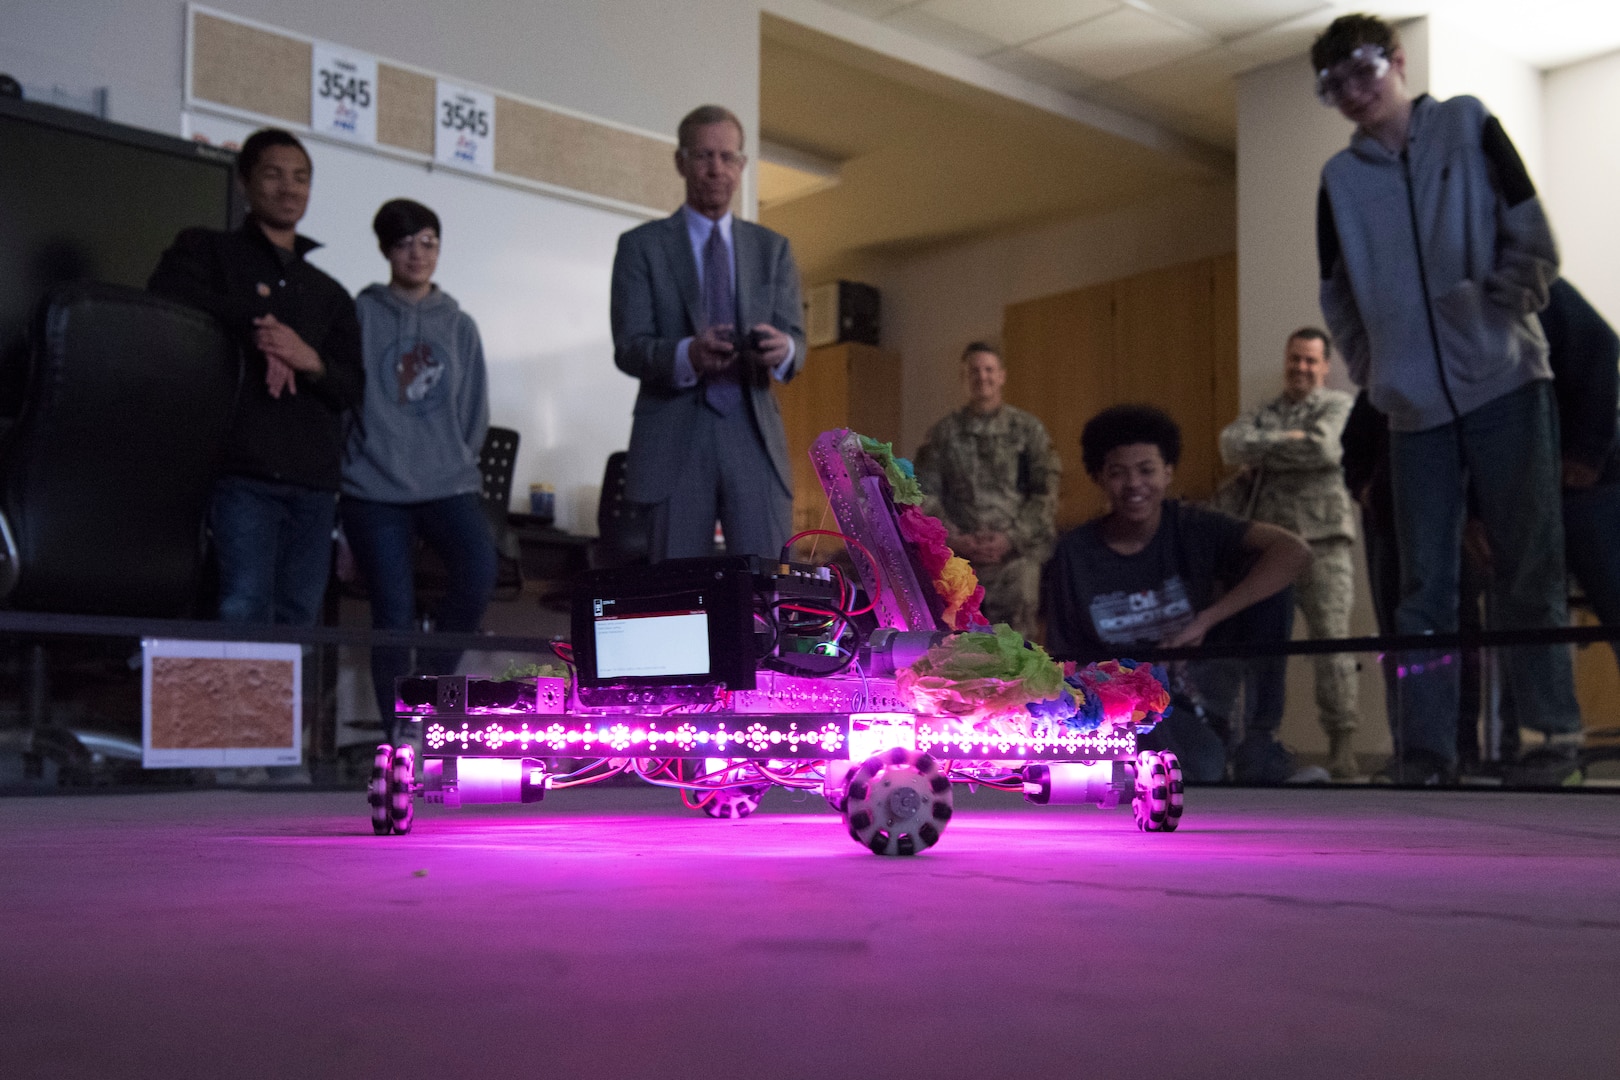 Frank Brogan, Department of Education assistant secretary for elementary and secondary education, visits Lackland Independent School District’s Bots in Blue and drives one of their robots April 12, 2019, at Joint Base San Antonio-Lackland, Texas.